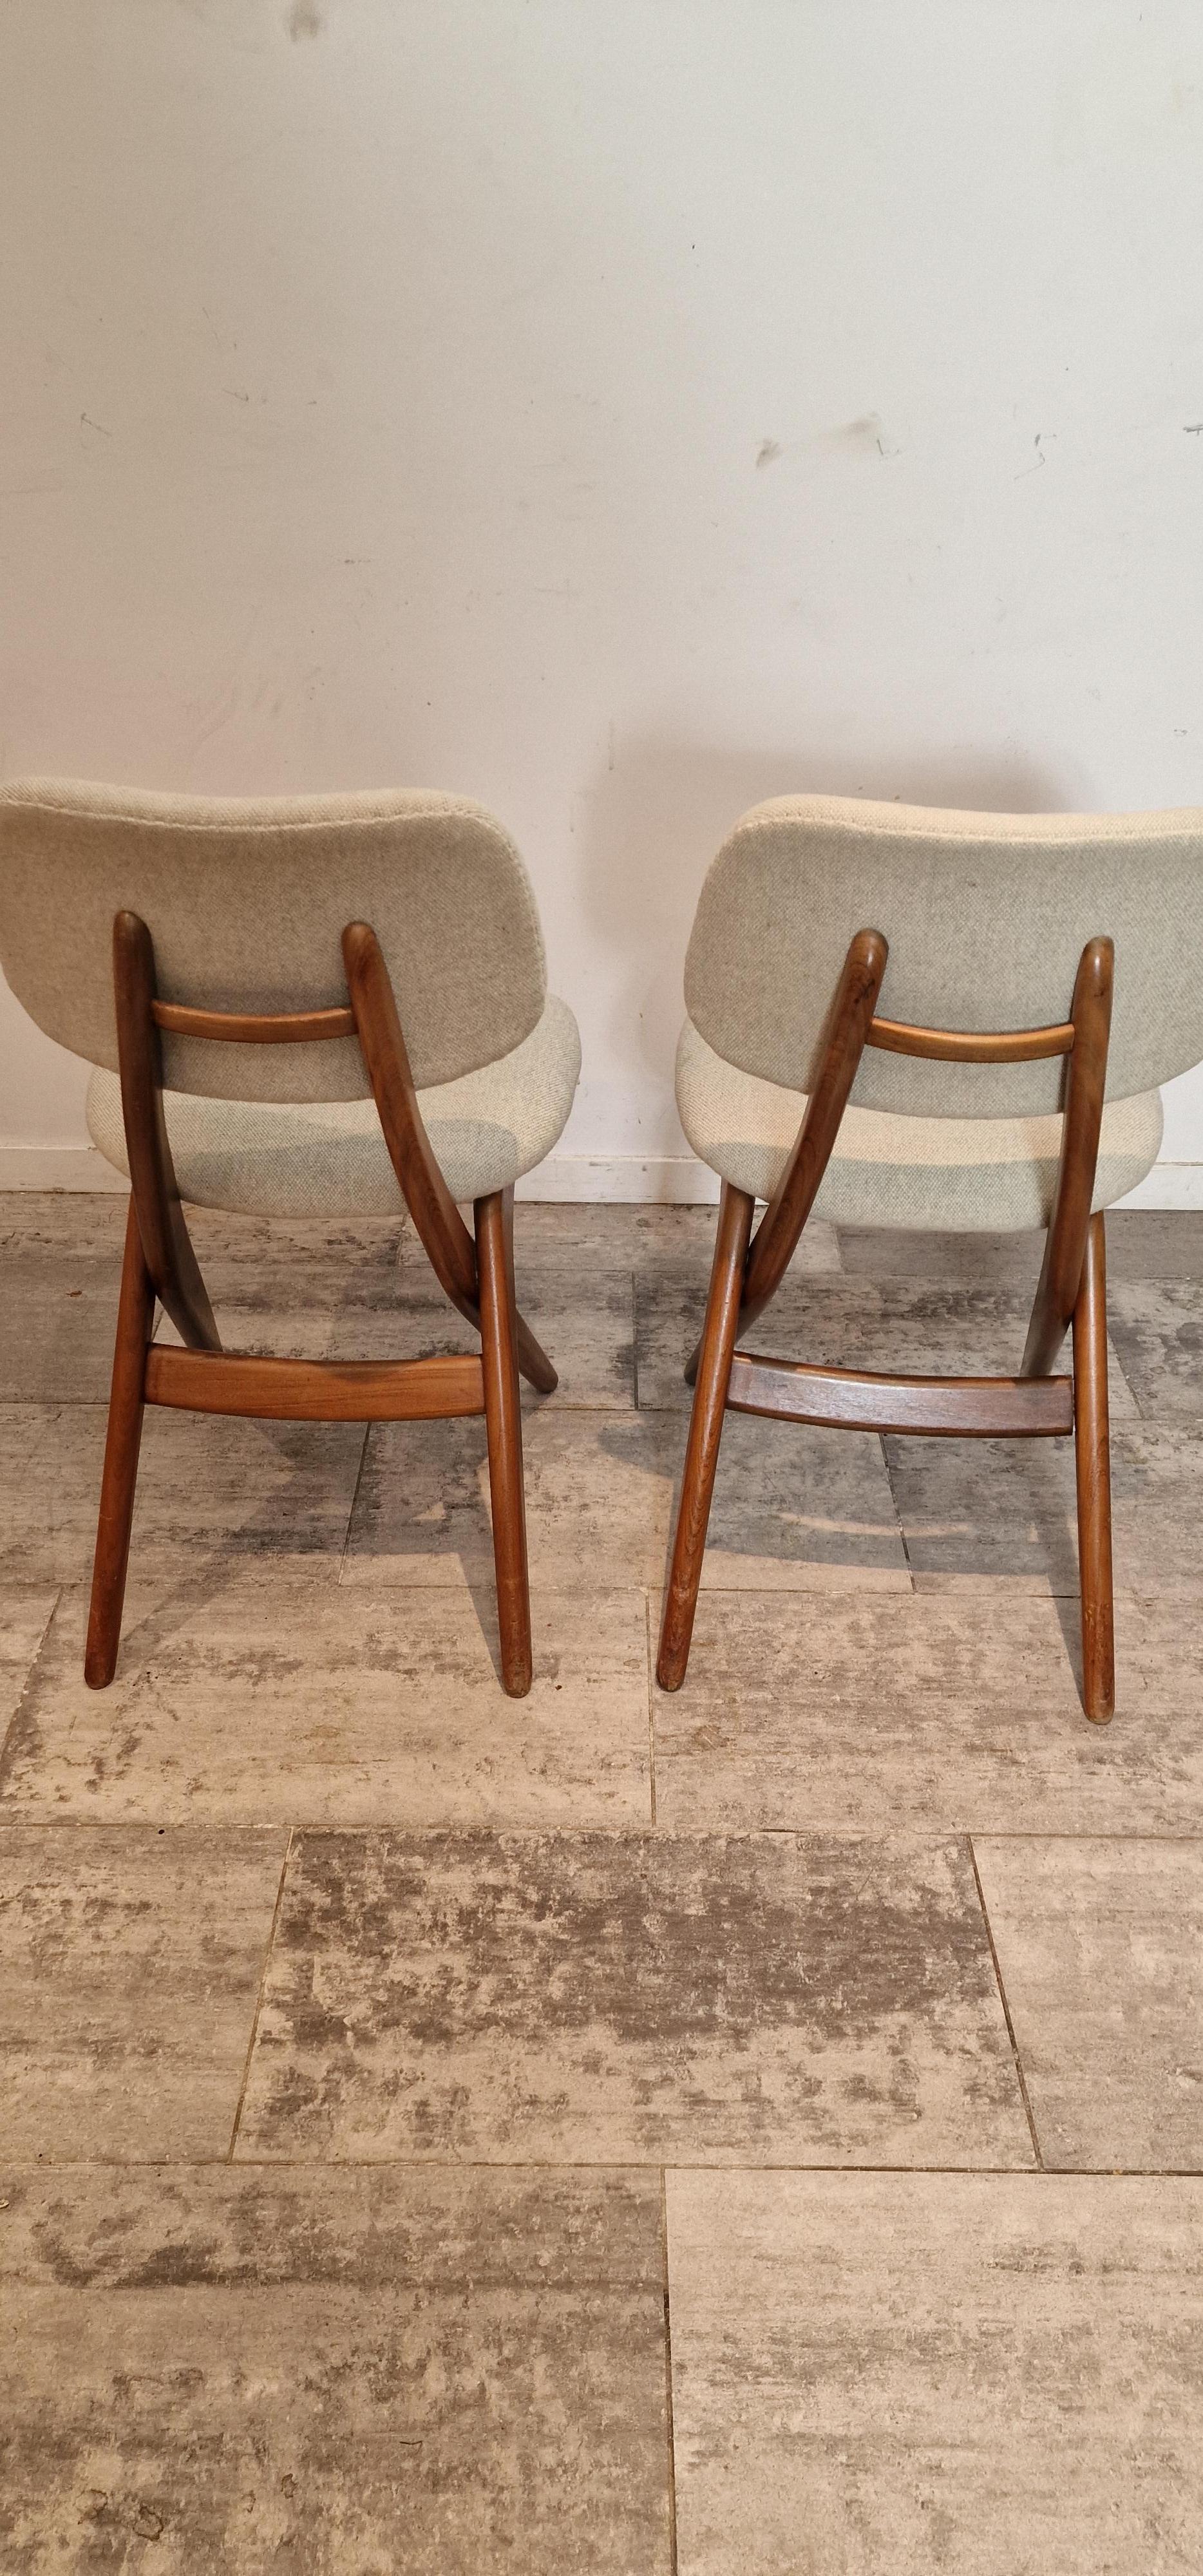 Four Scissor Chairs from Louis Van Teeffelen for Wébé In Good Condition For Sale In Waasmunster, BE